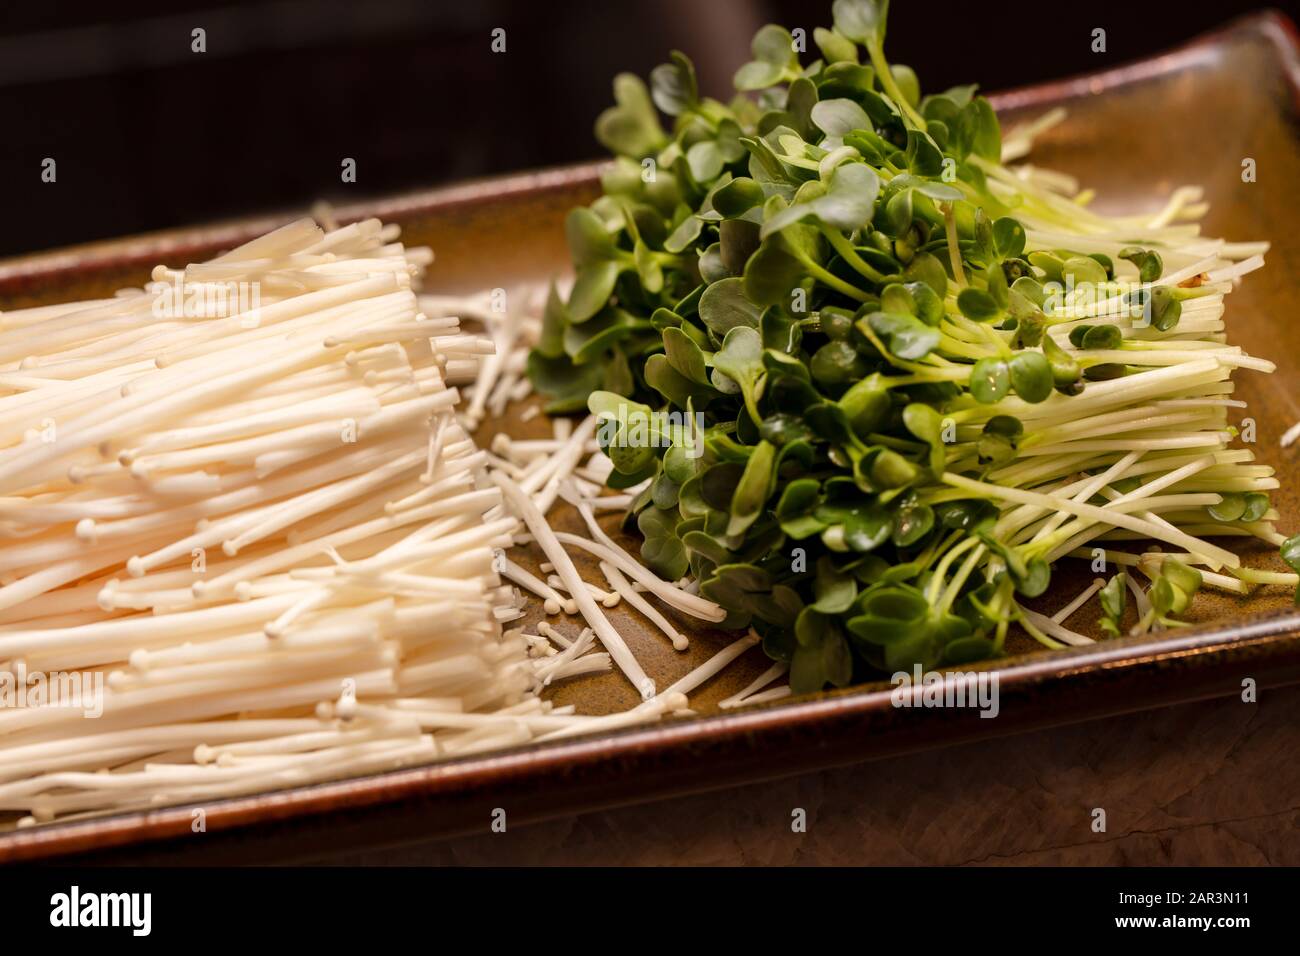 Julienne carrots, Enokitake Mushrooms and green radish sprouts cut up and used for making Sushi Stock Photo